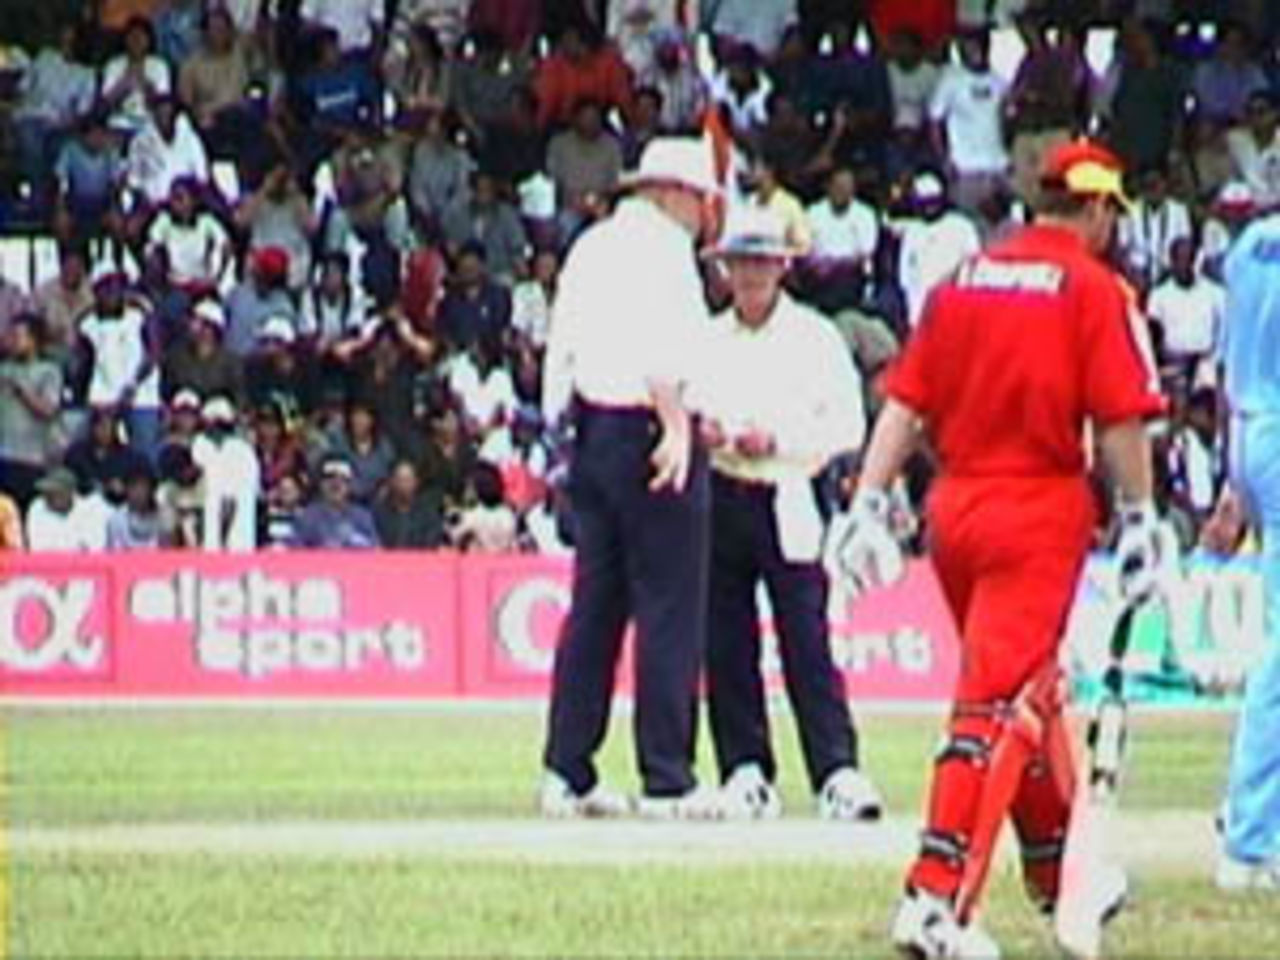 Alistair Campbell coming in at the fall of the Neil Johnson's wicket, India v Zimbabwe (2nd ODI), Coca-Cola Singapore Challenge, 1999-2000, Kallang Ground, Singapore, 4 Sep 1999